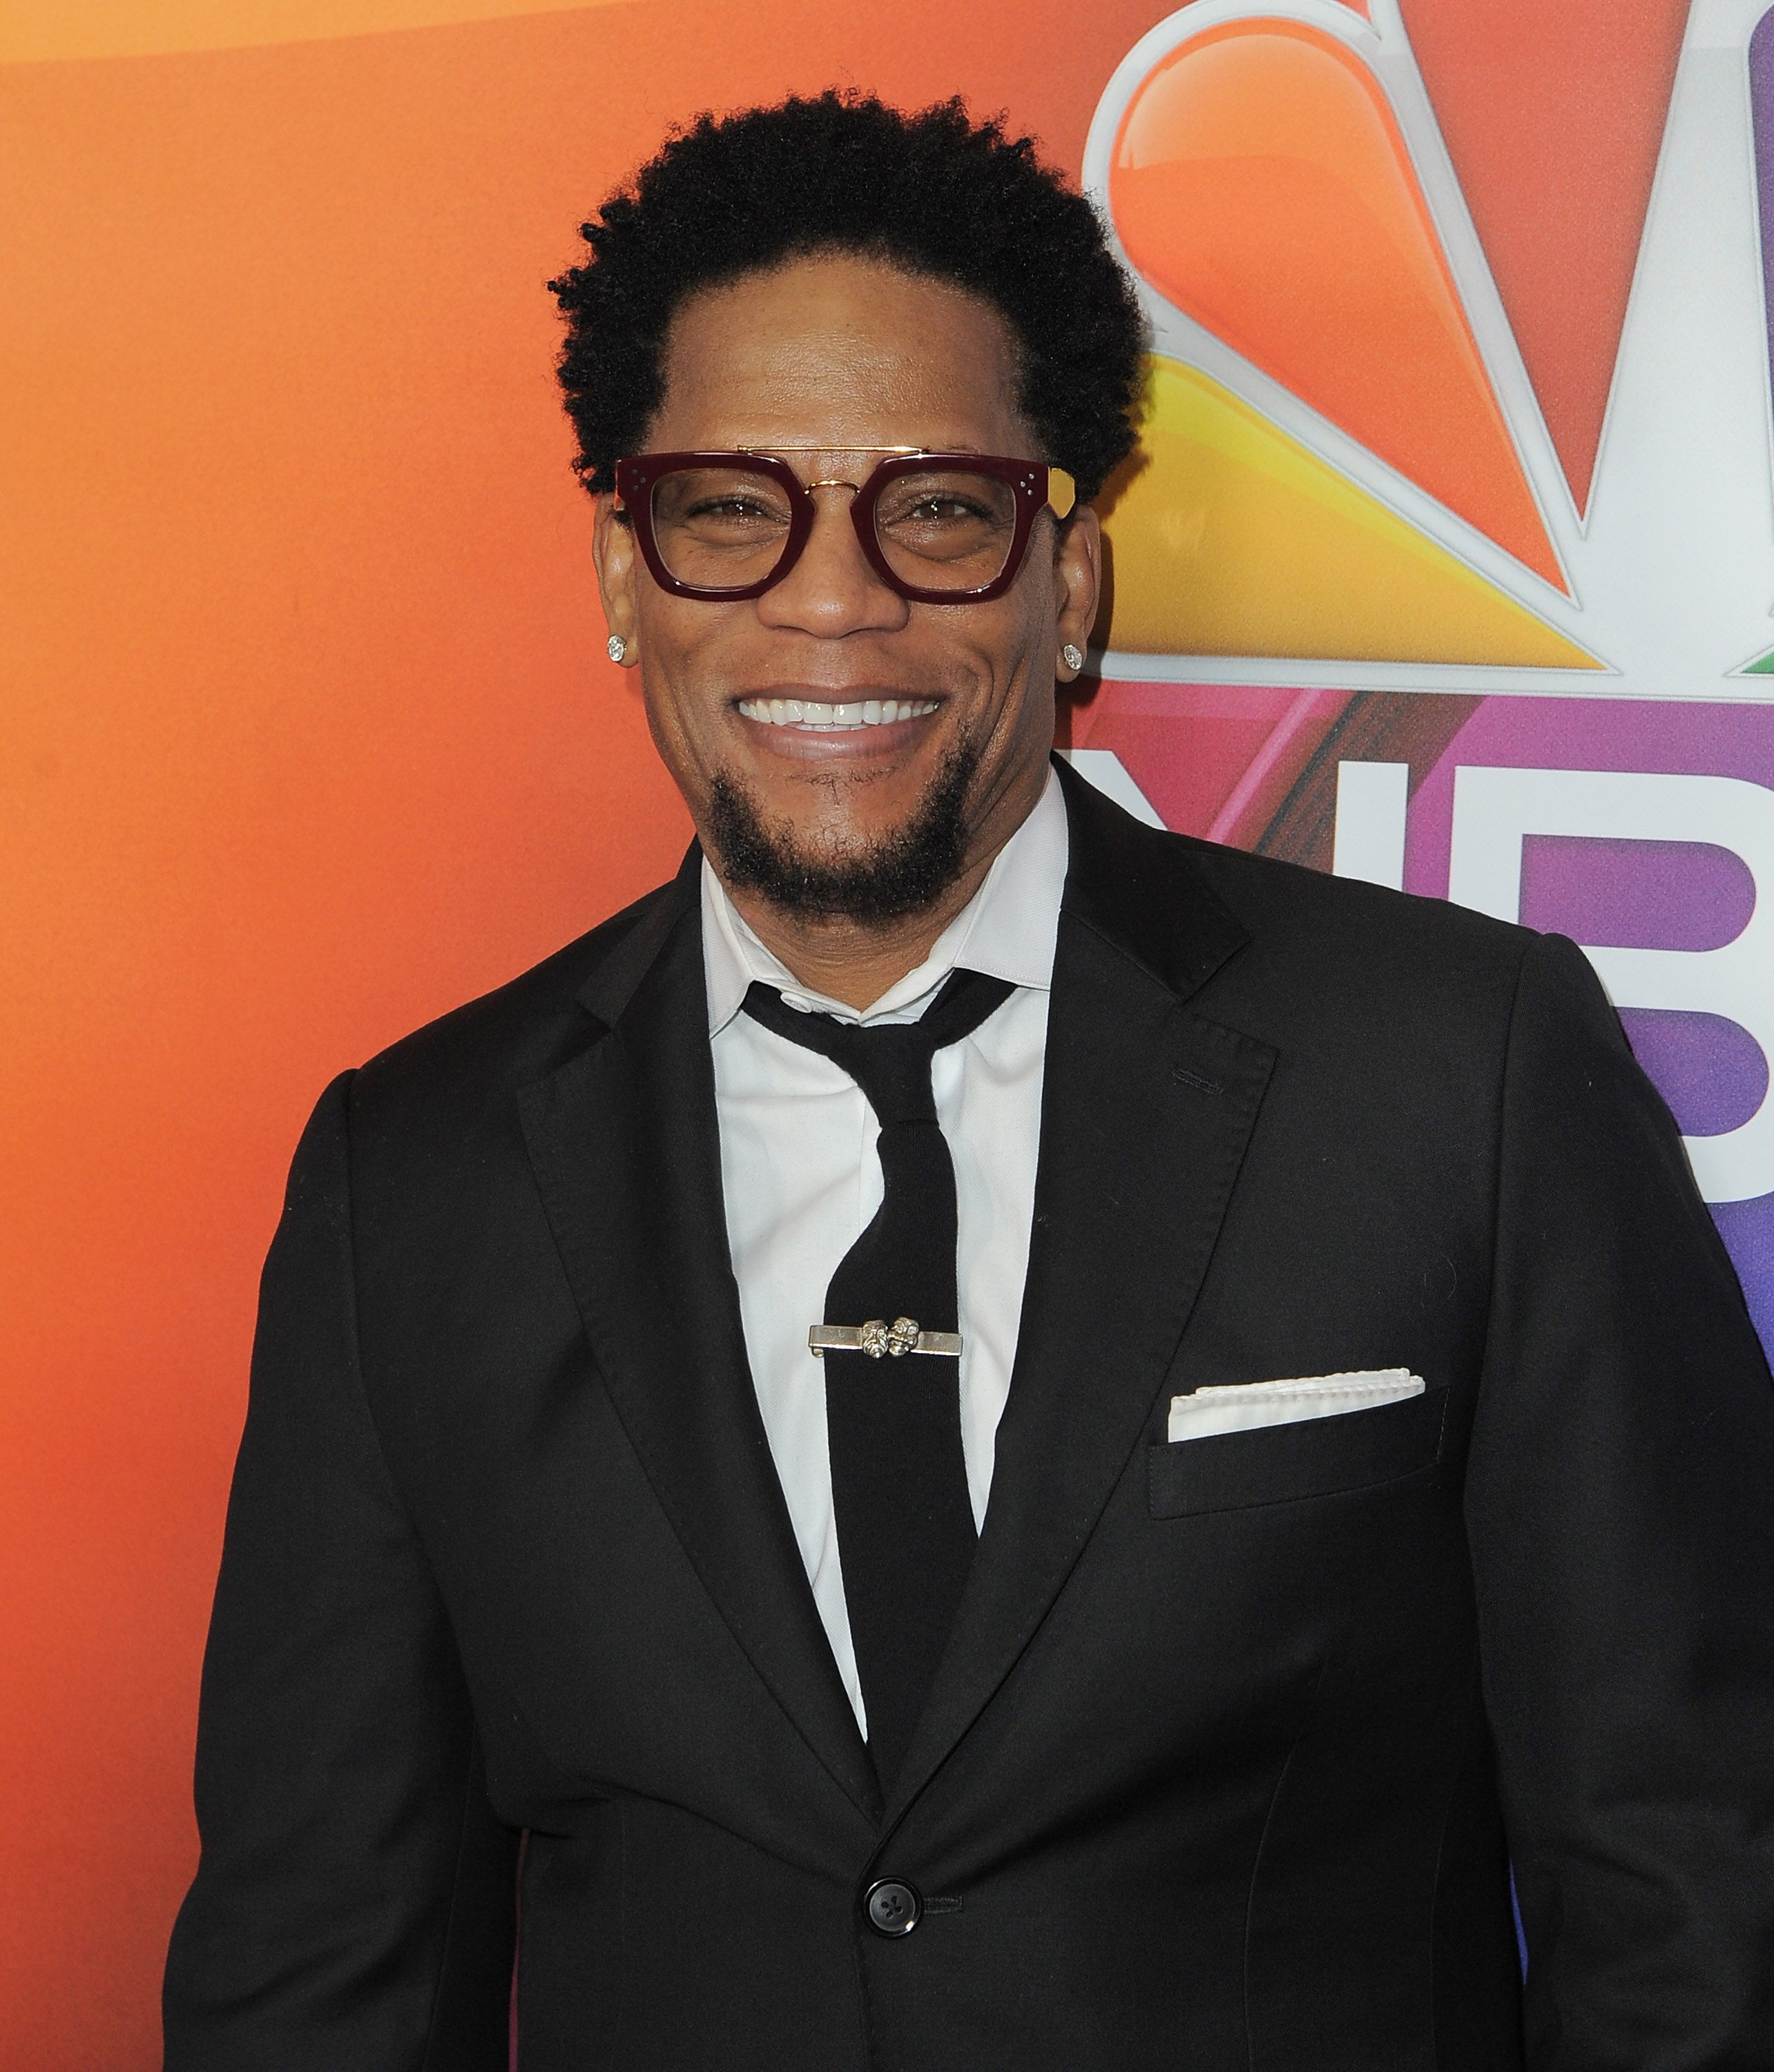 Actor D.L. Hughley at the Winter TCA Tour - NBCUniversal Press Tour at Langham Hotel on January 13, 2016 in Pasadena, California | Photo: Getty Images